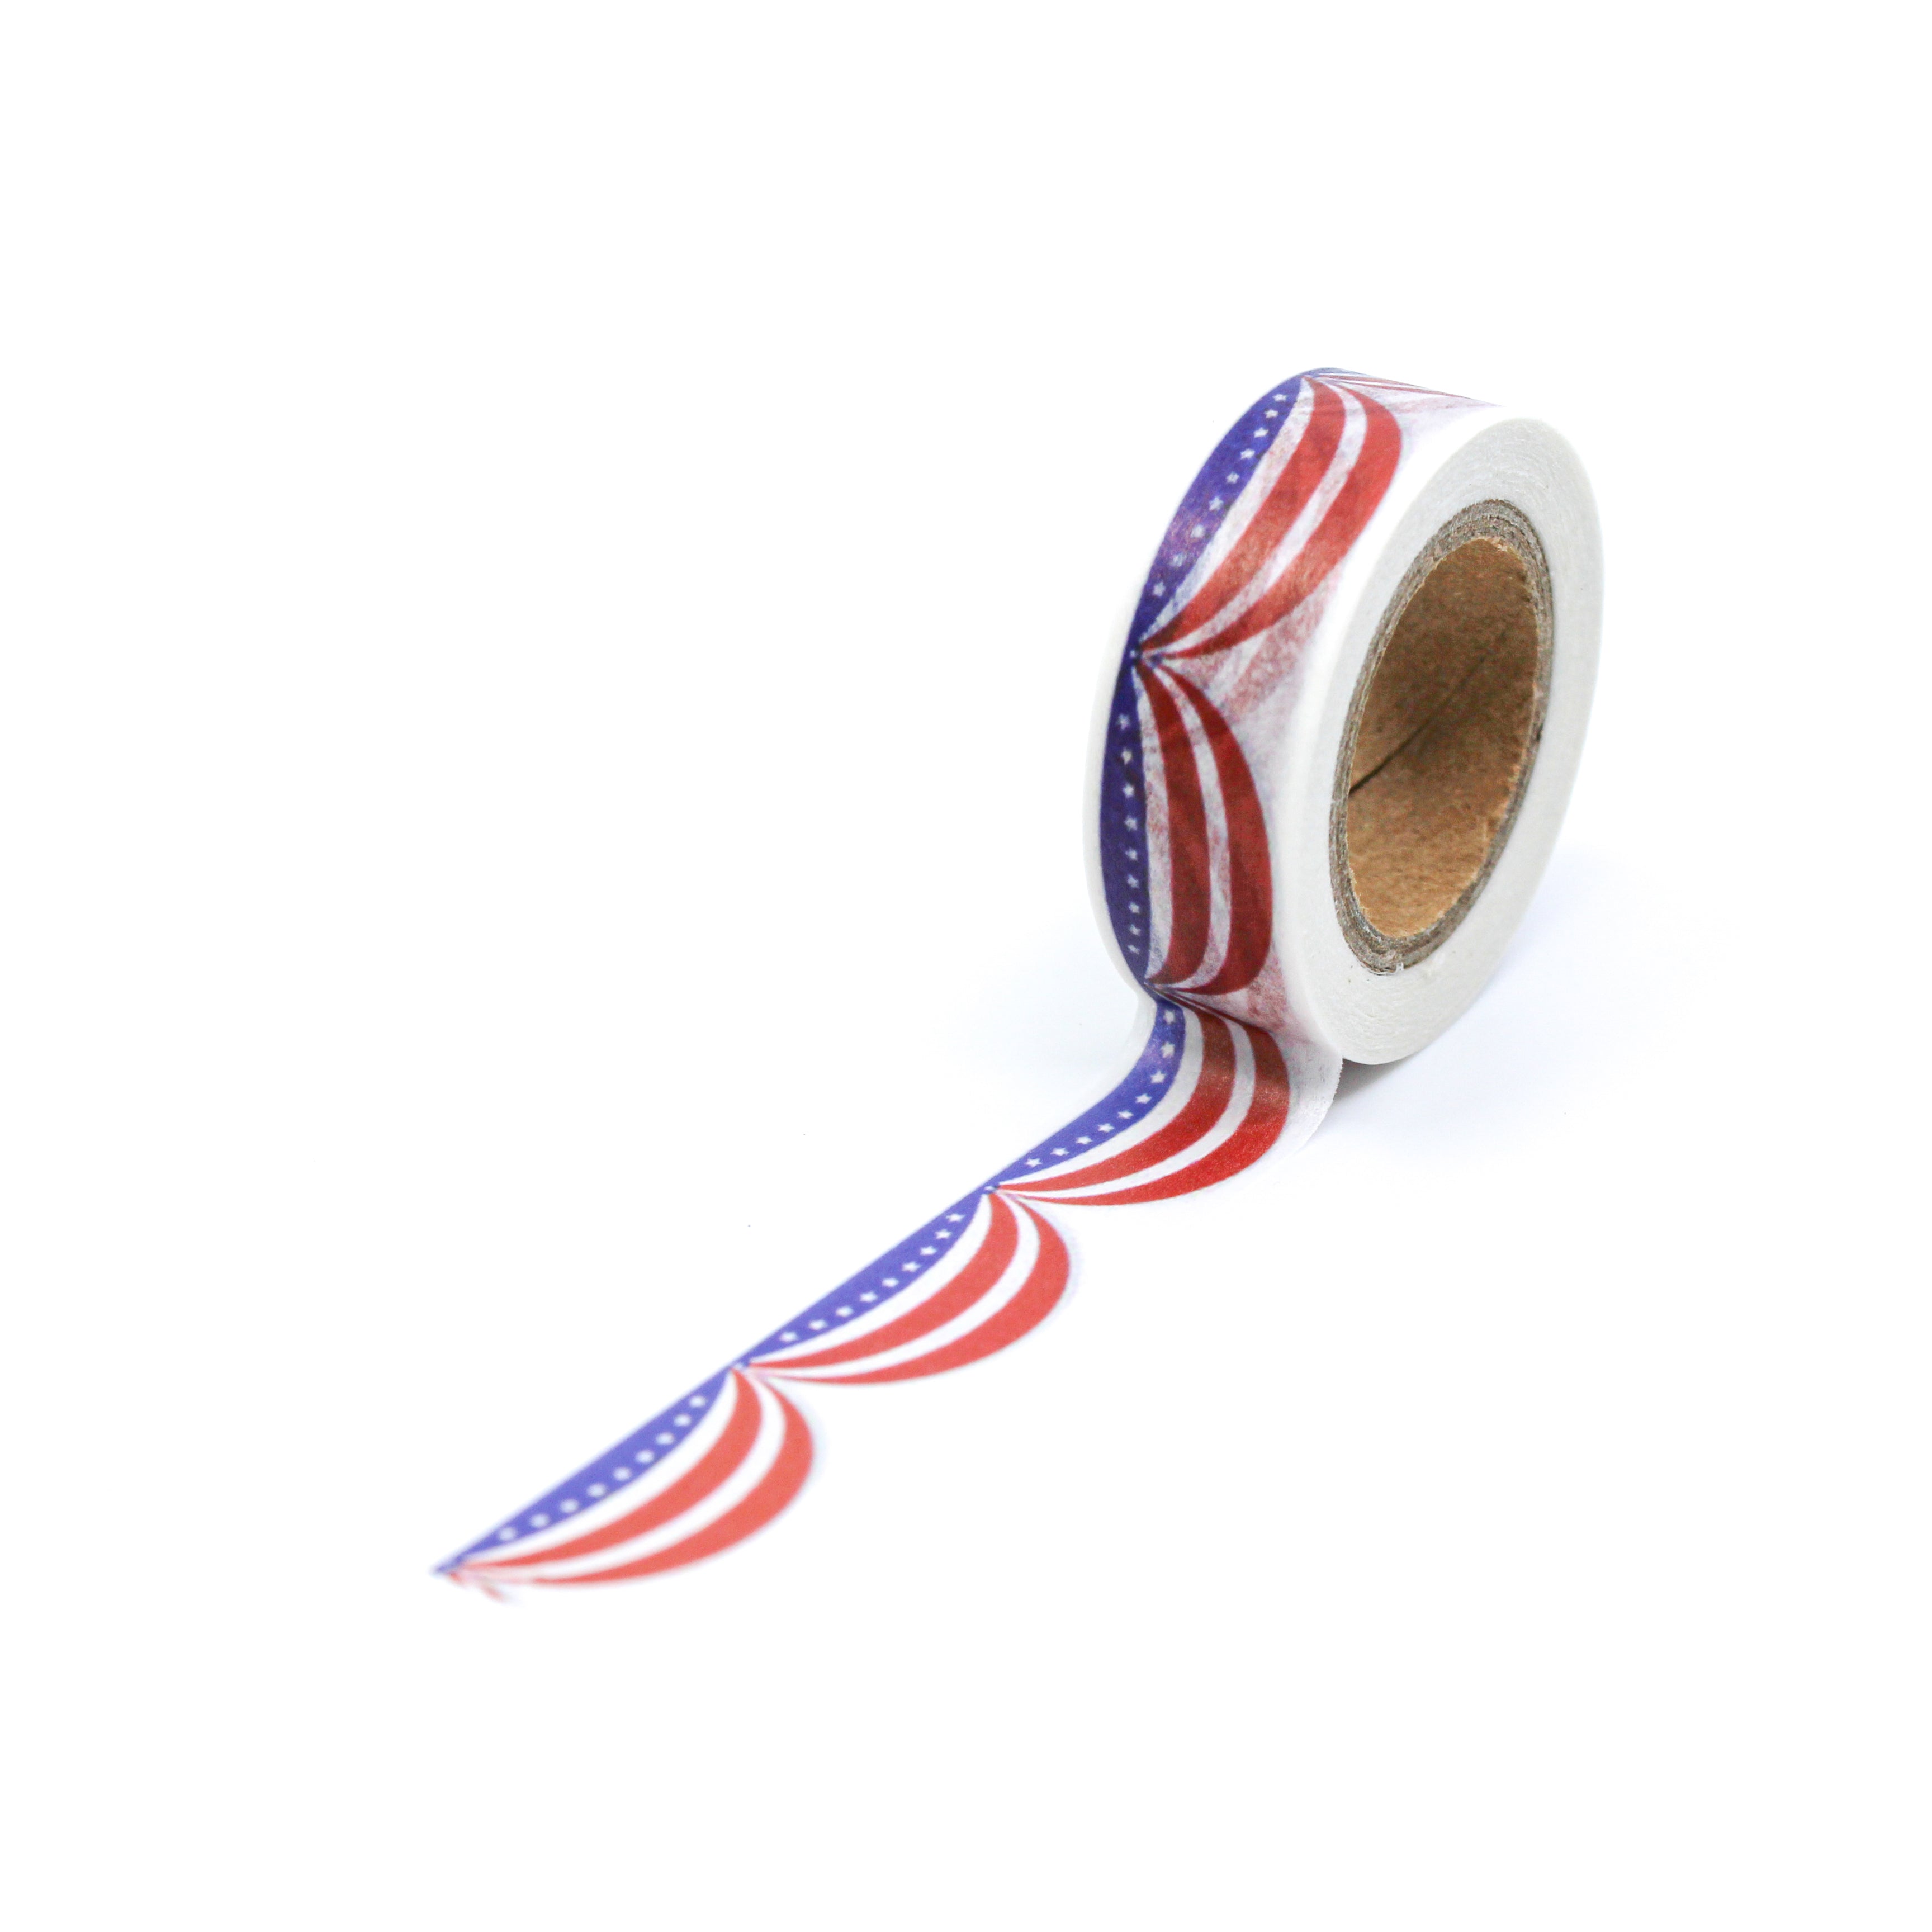 This is a full pattern repeat view of red, white and blue American flag washi tape from BBB Supplies Craft Shop